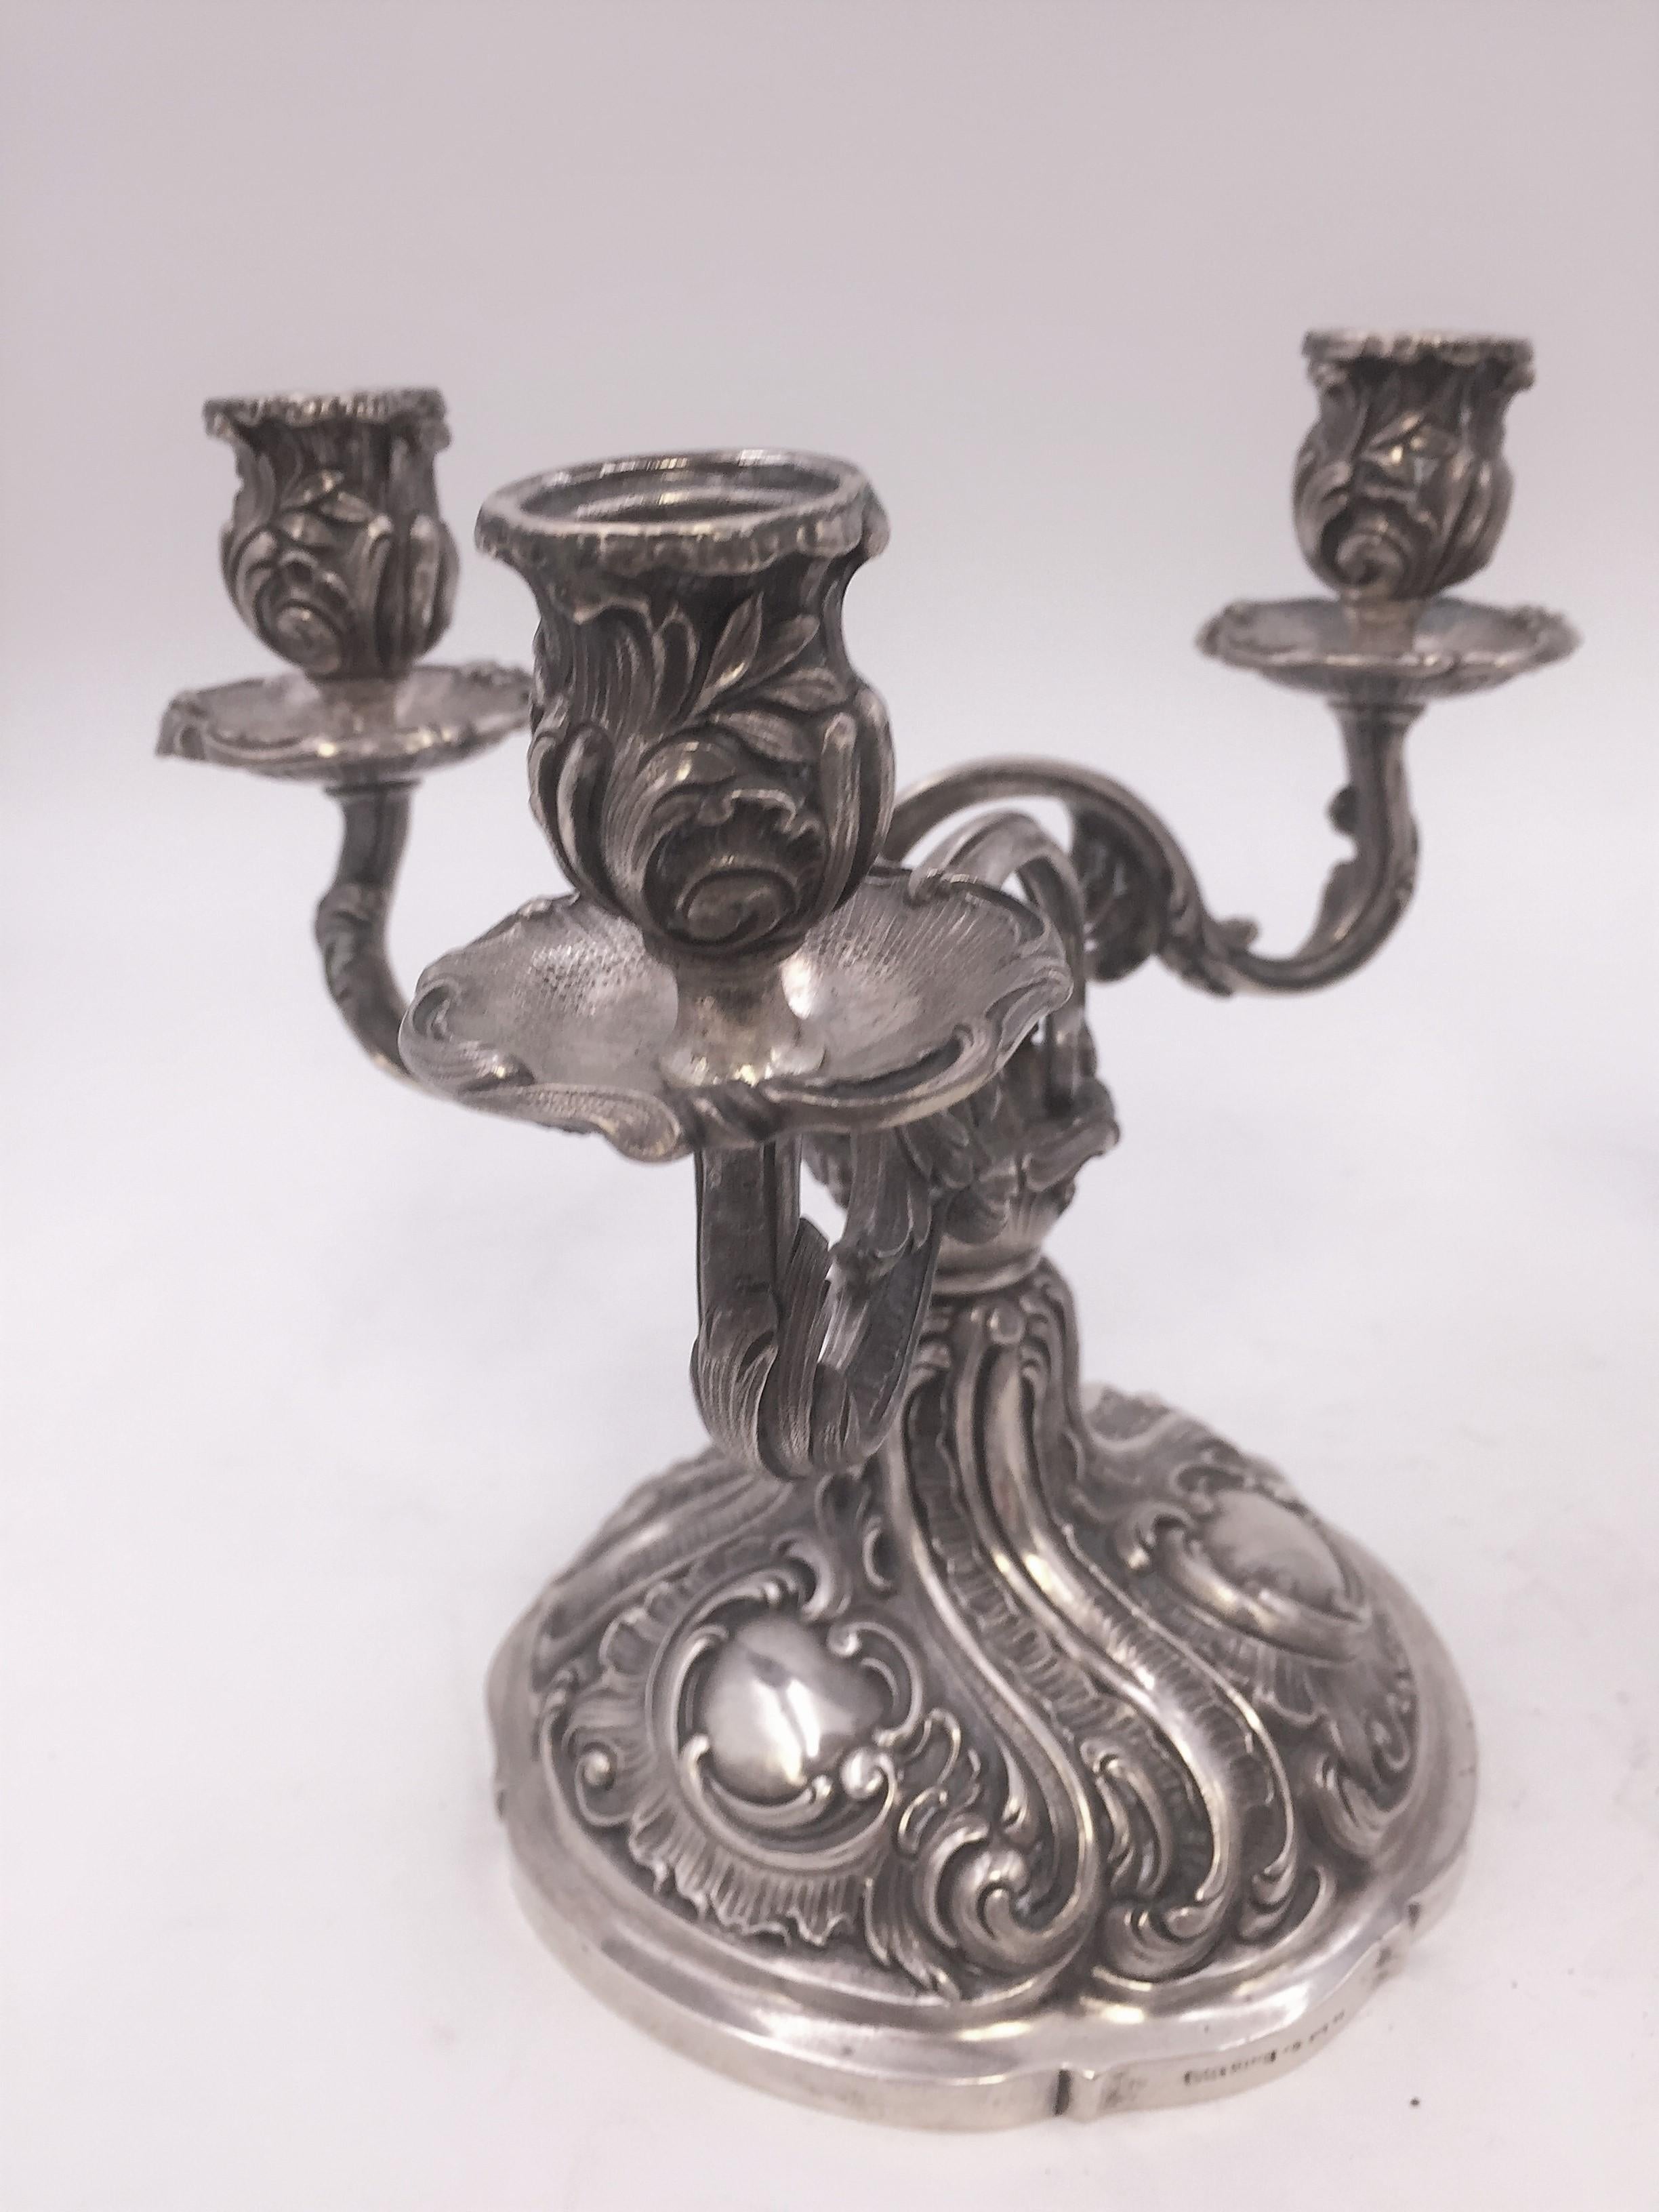 Pair of German 800 silver candelabra by Eugene Marcus, designed with raised foliage on the bobeches and on the base, three dimensional foliage on the stems of the candelabra. Measuring approximately 7 inches tall and 7 1/2 inches wide. Weighing